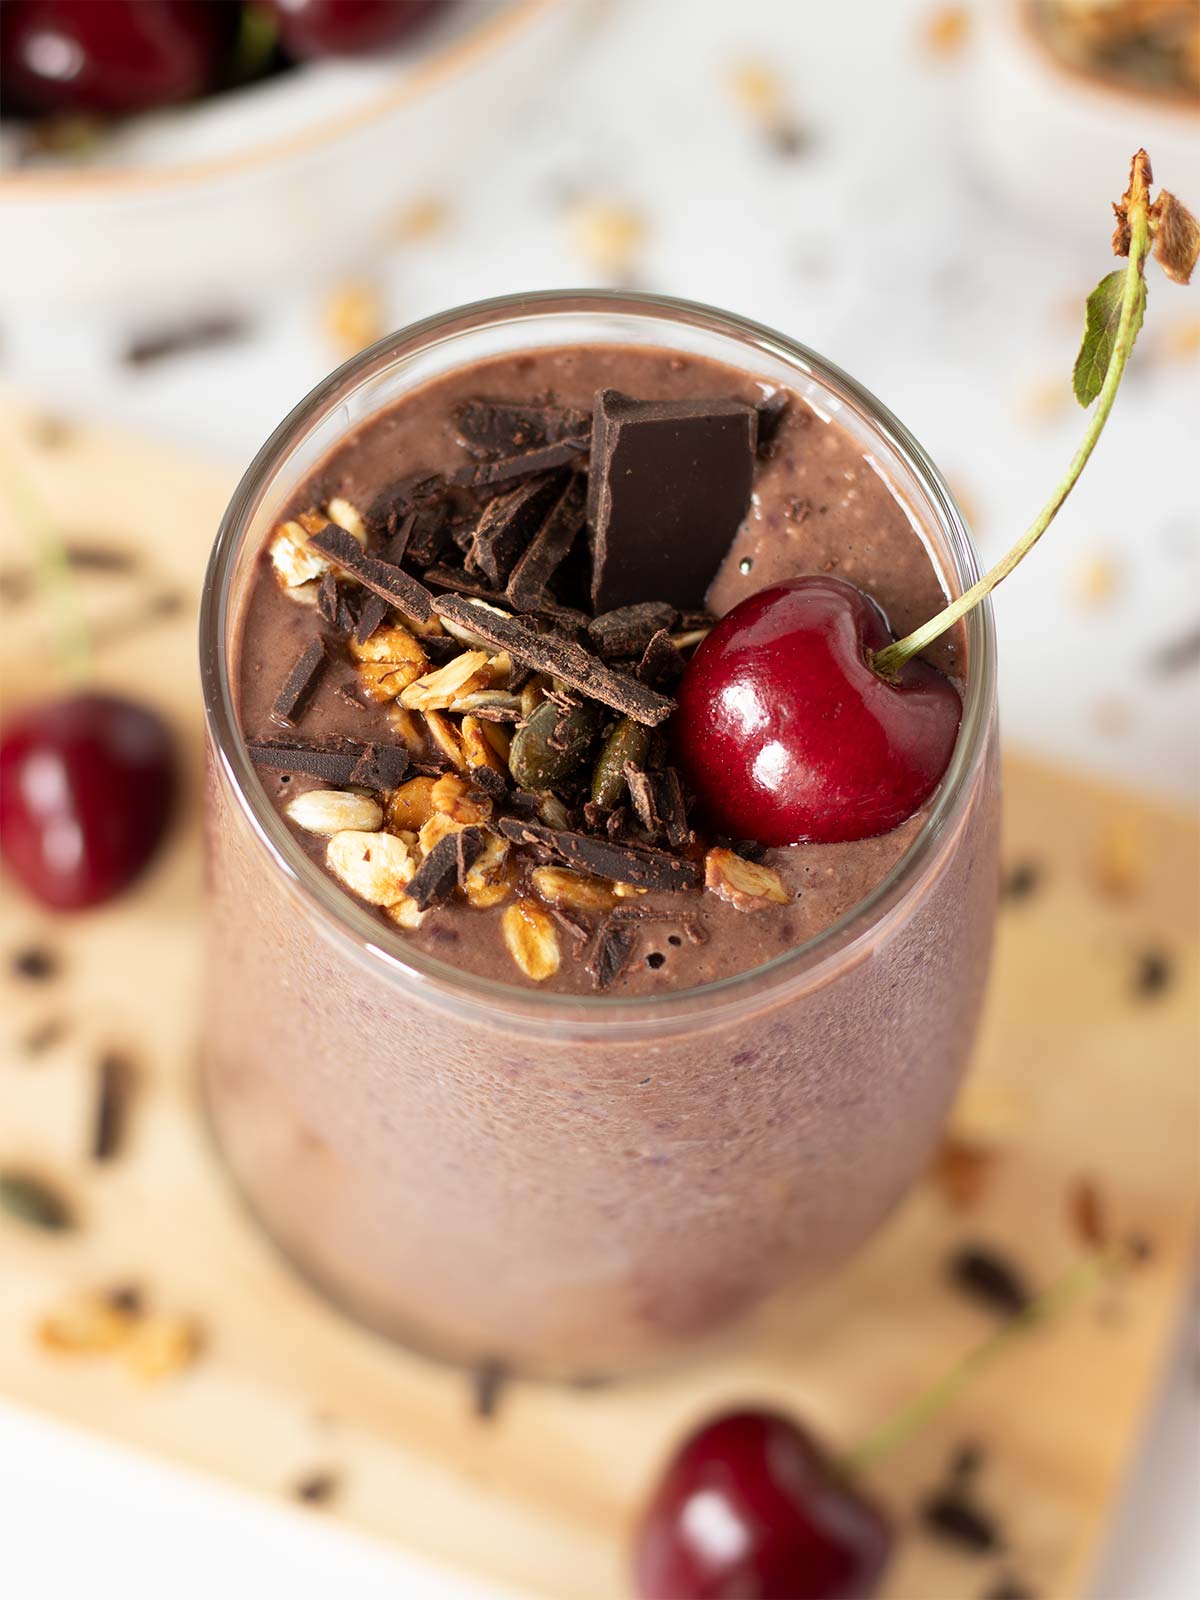 Chocolate cherry oat smoothie with date and peanut butter in a glass